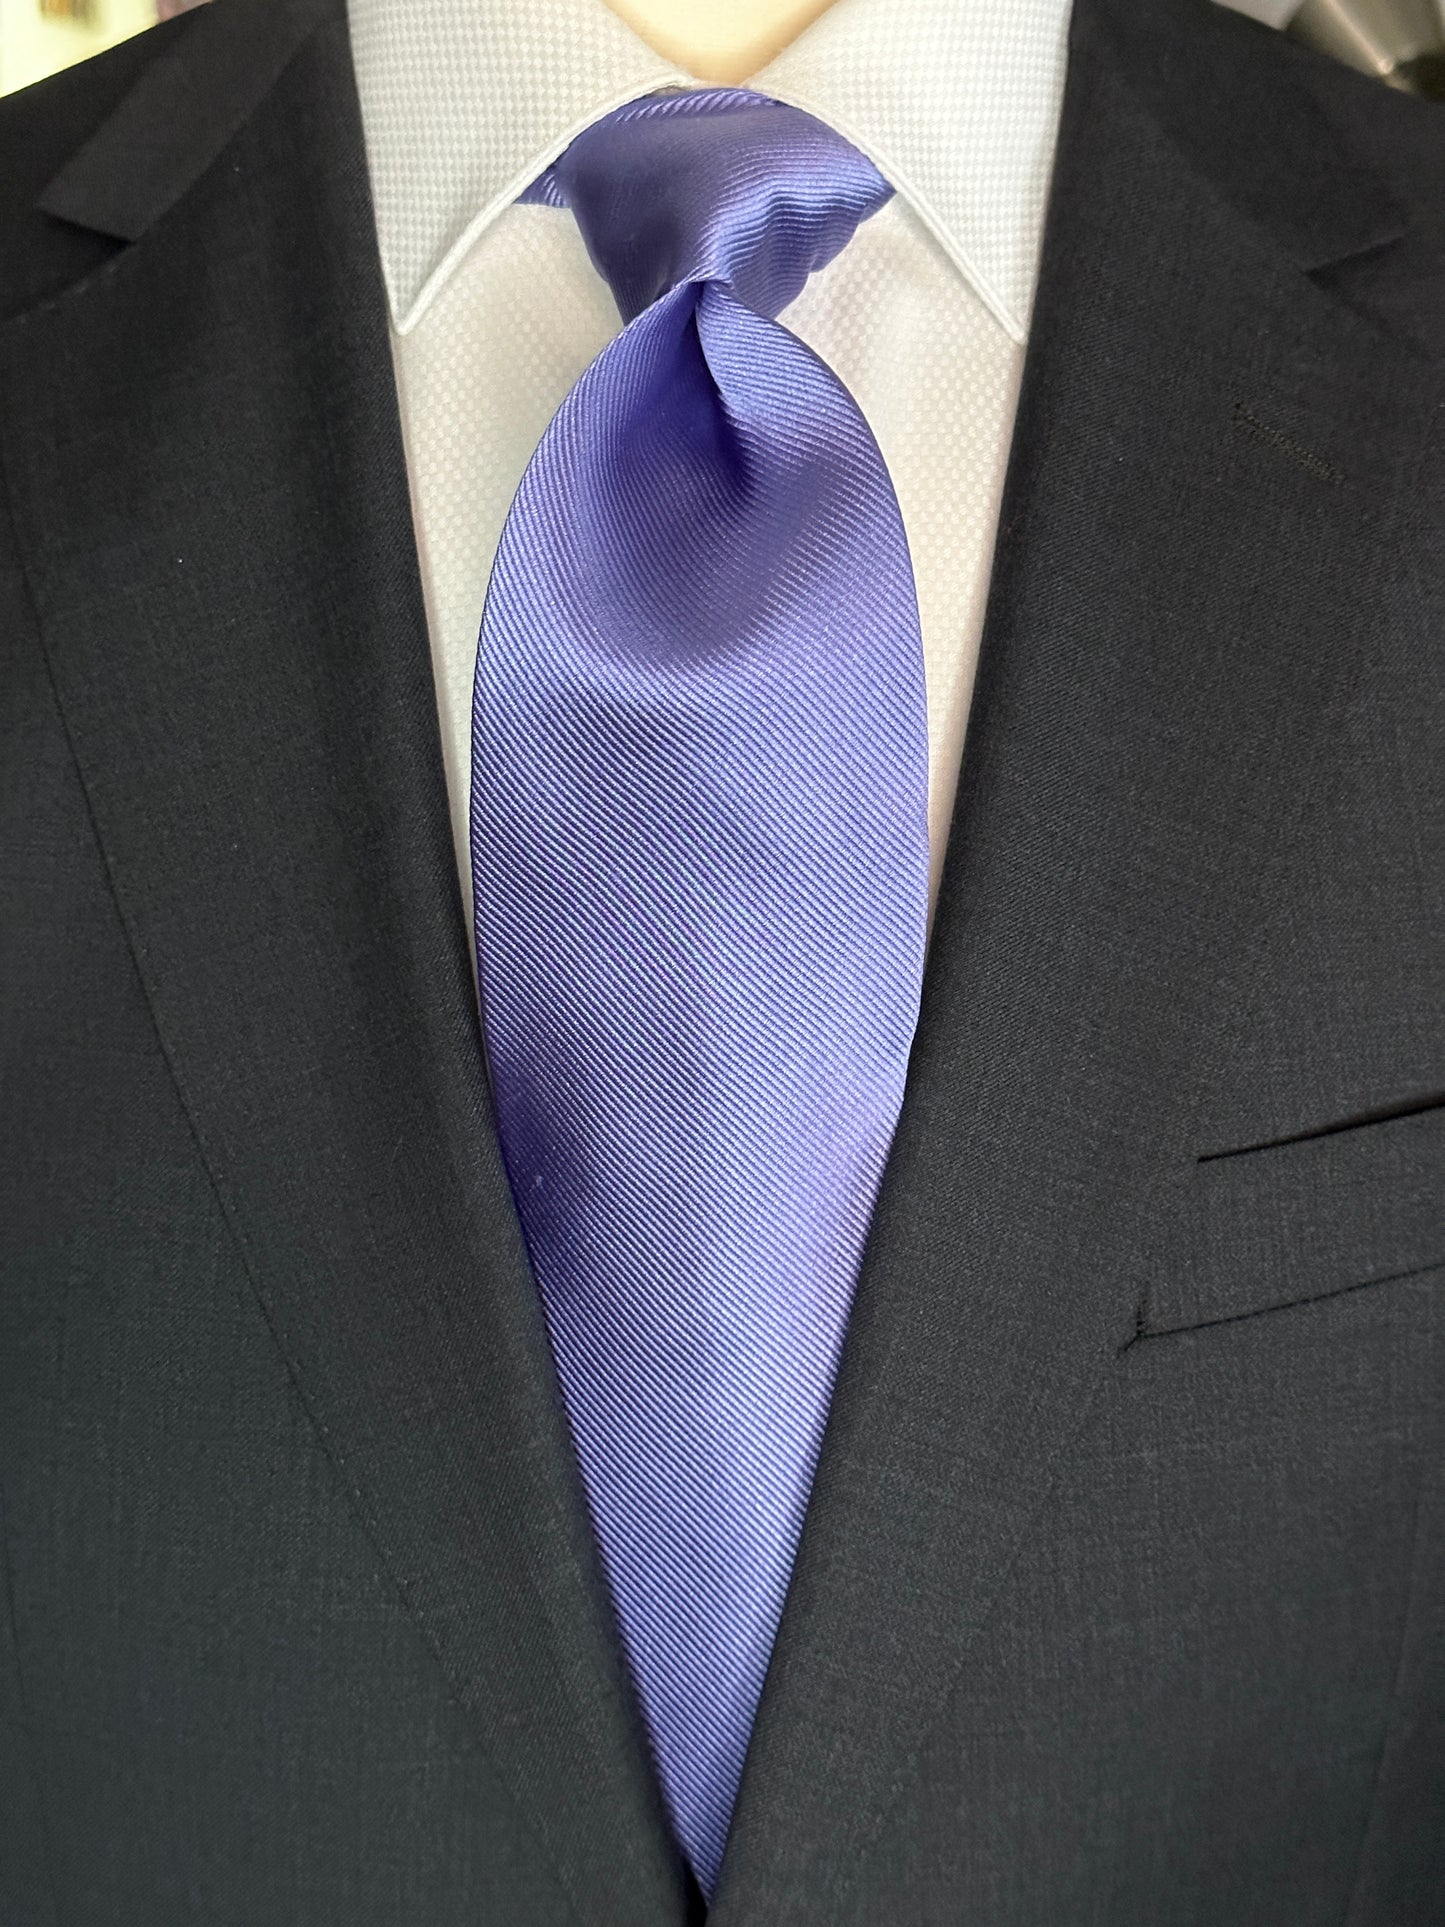 Solid ties are beautifully paired with the more busy of patters of bold stripes and heavy plaids. However, there is something so understated and elegant about a solid tie with a solid suit. Whether that be navy, charcoal or black a lavender tie fits well with a white shirt and even a navy blazer with jeans.